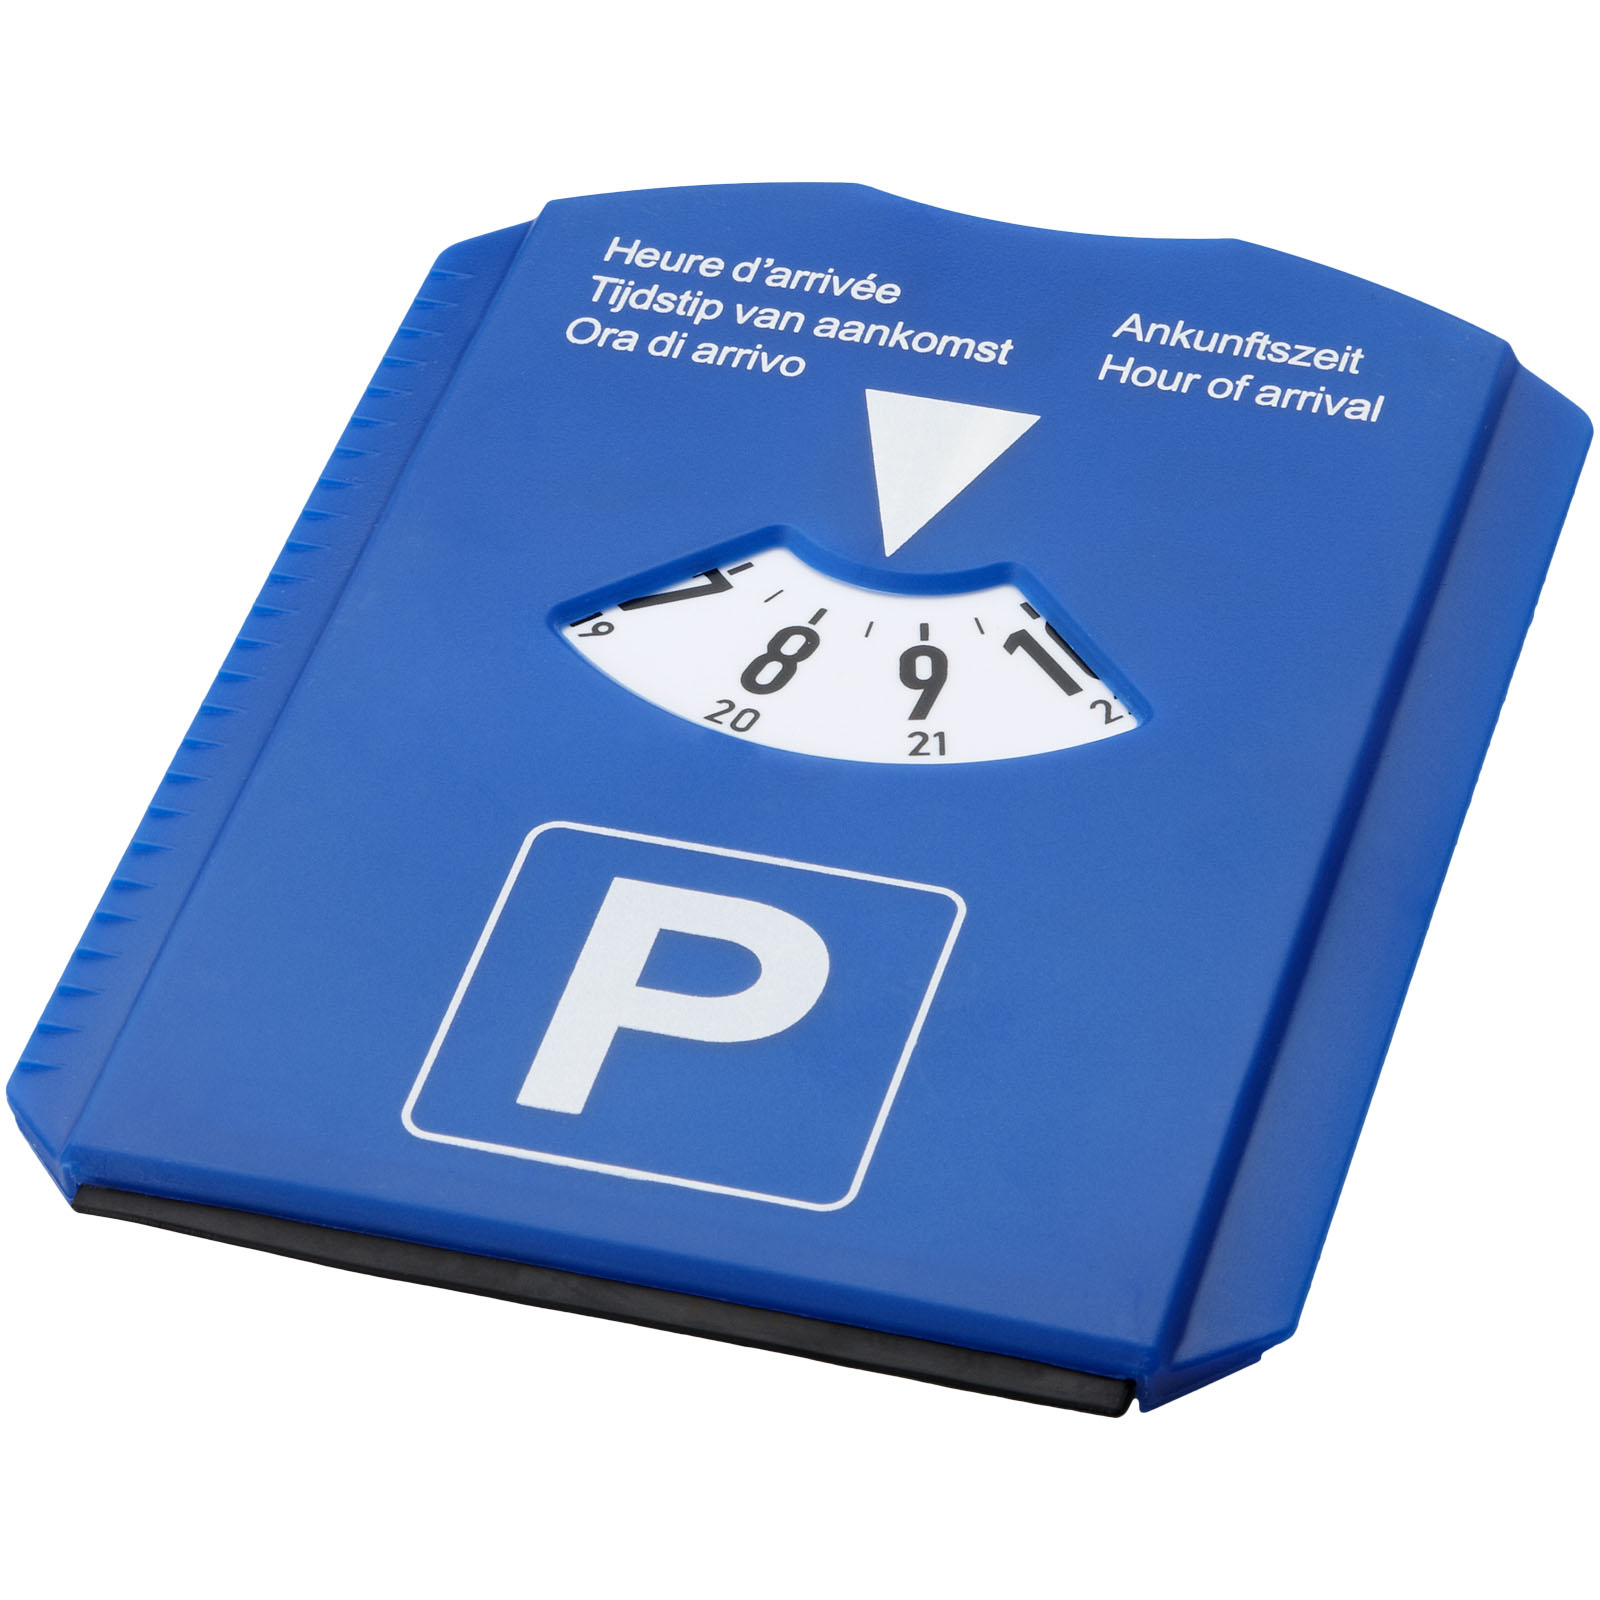 Advertising Car Accessories - Spot 5-in-1 parking disc